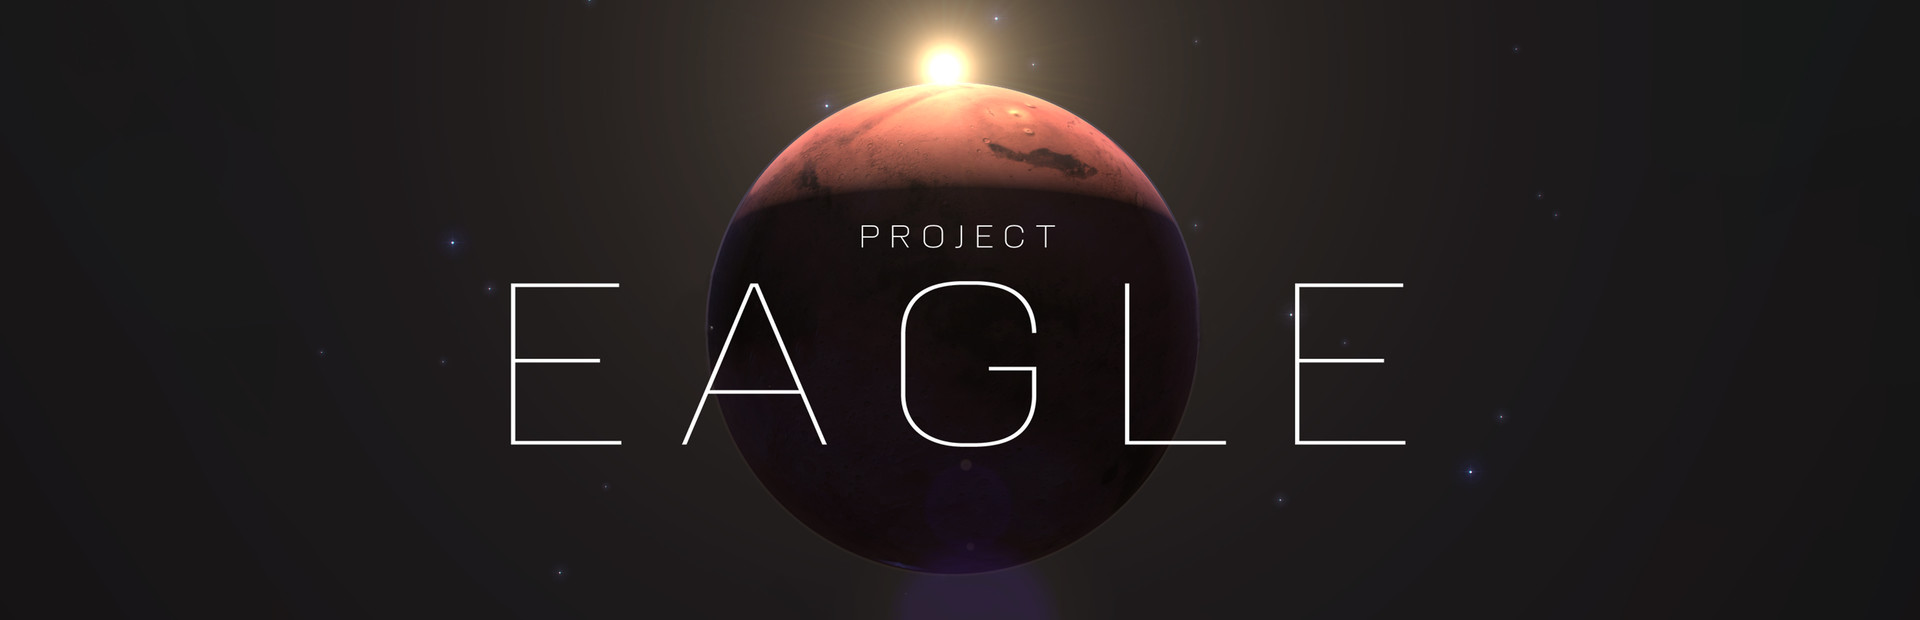 Project Eagle: A 3D Interactive Mars Base cover image